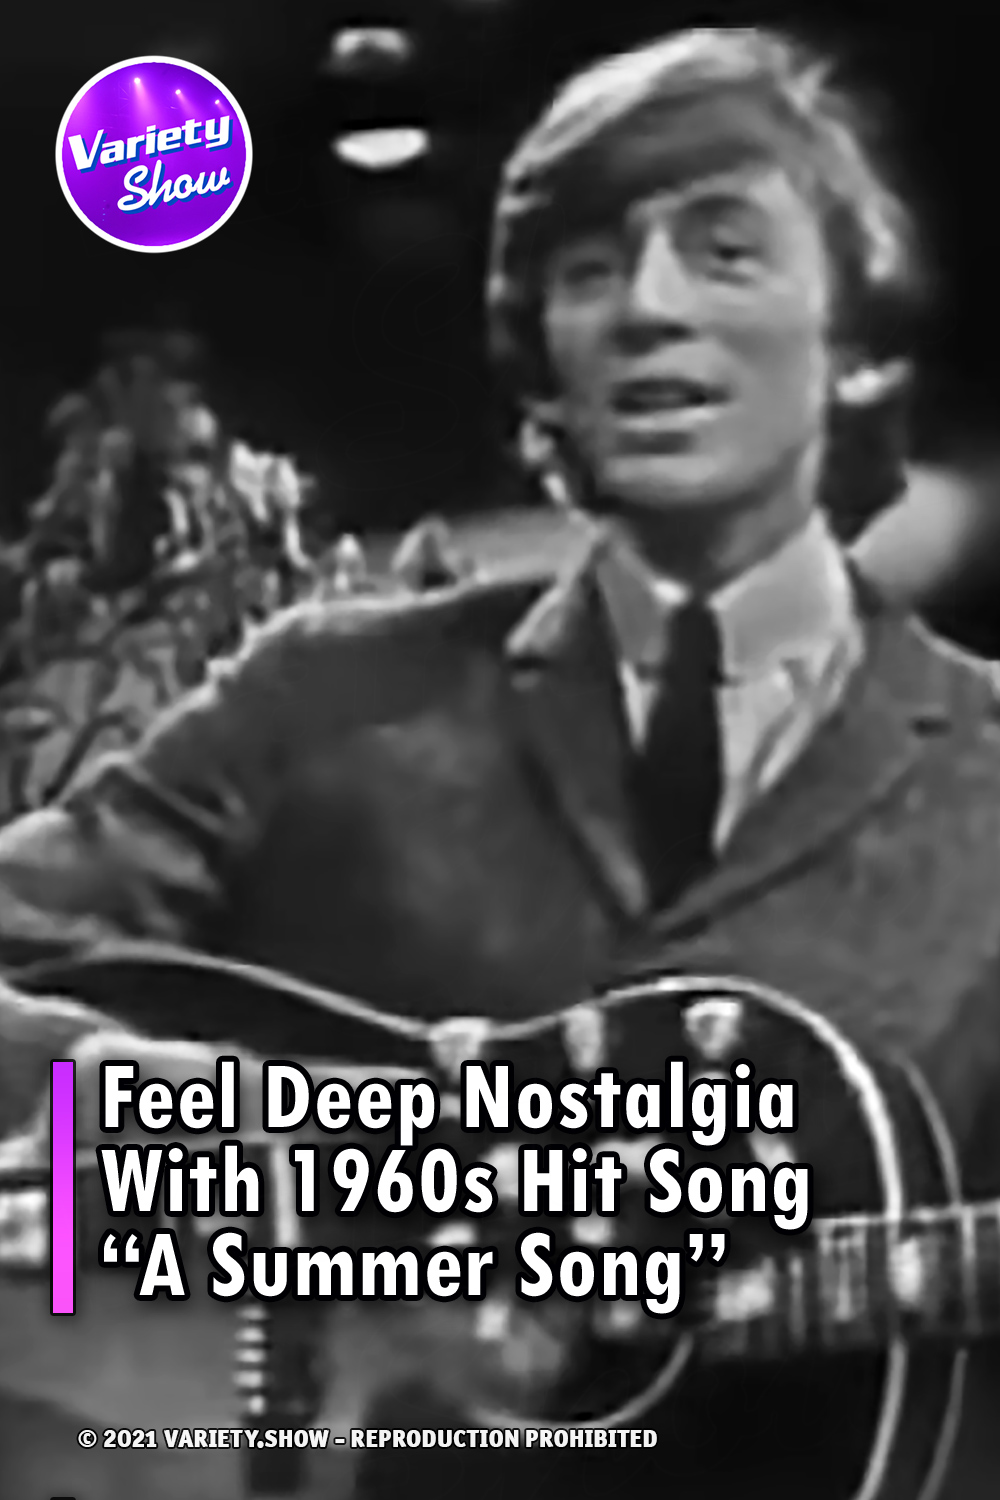 Feel Deep Nostalgia With 1960s Hit Song “A Summer Song”